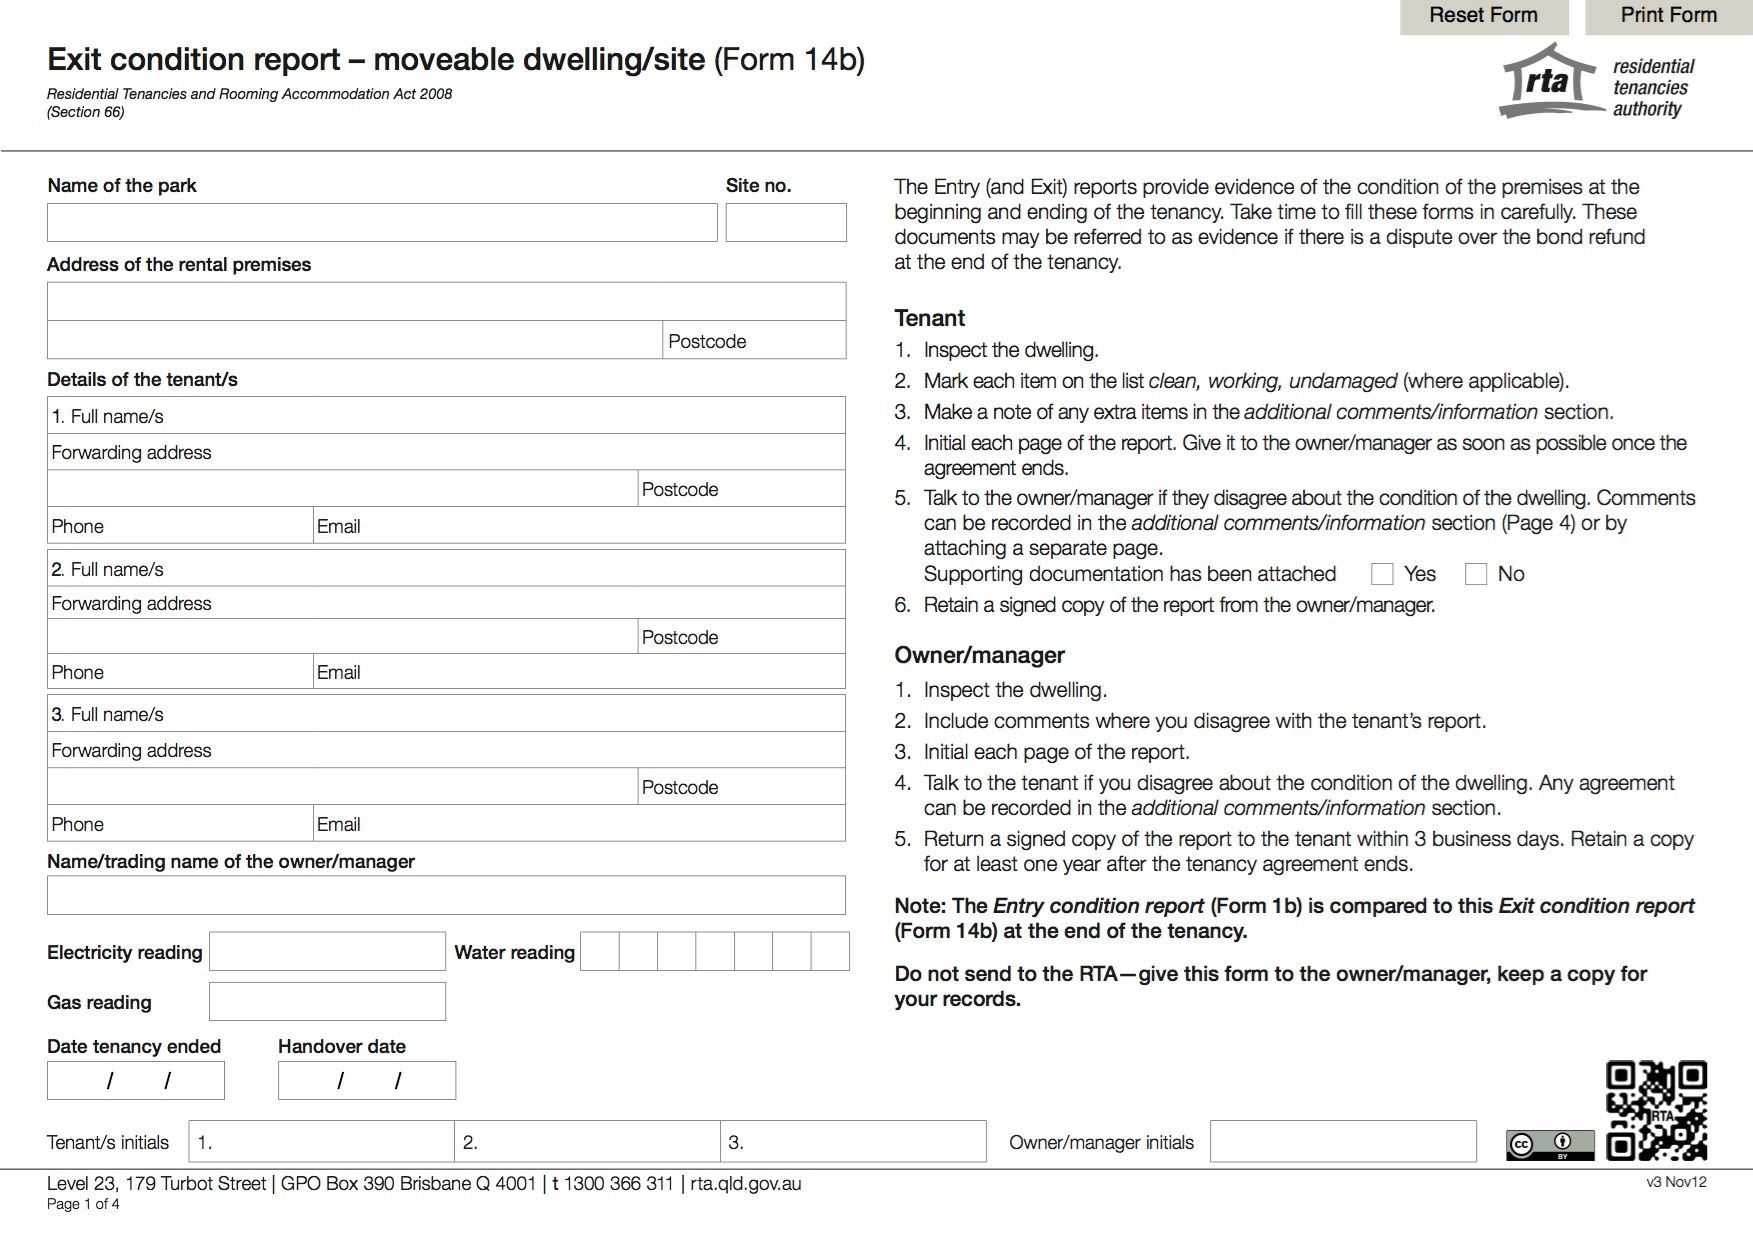 Incident Report Form Template Qld ] - Michael Smith News 17 With Incident Report Form Template Qld